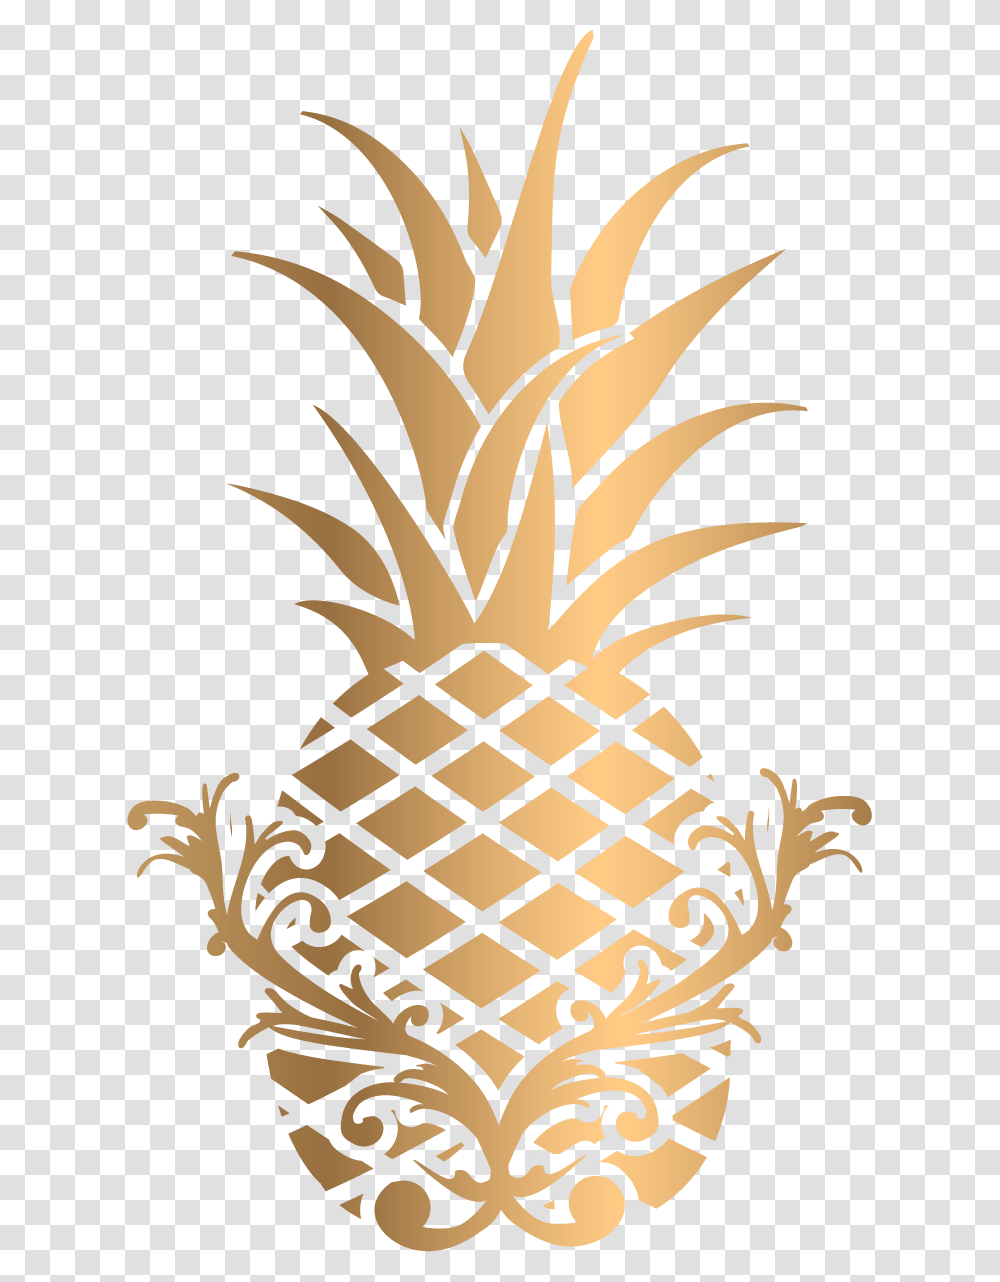 Gold Pineapple Clip Background Gold Pineapple, Plant, Fruit, Food Transparent Png